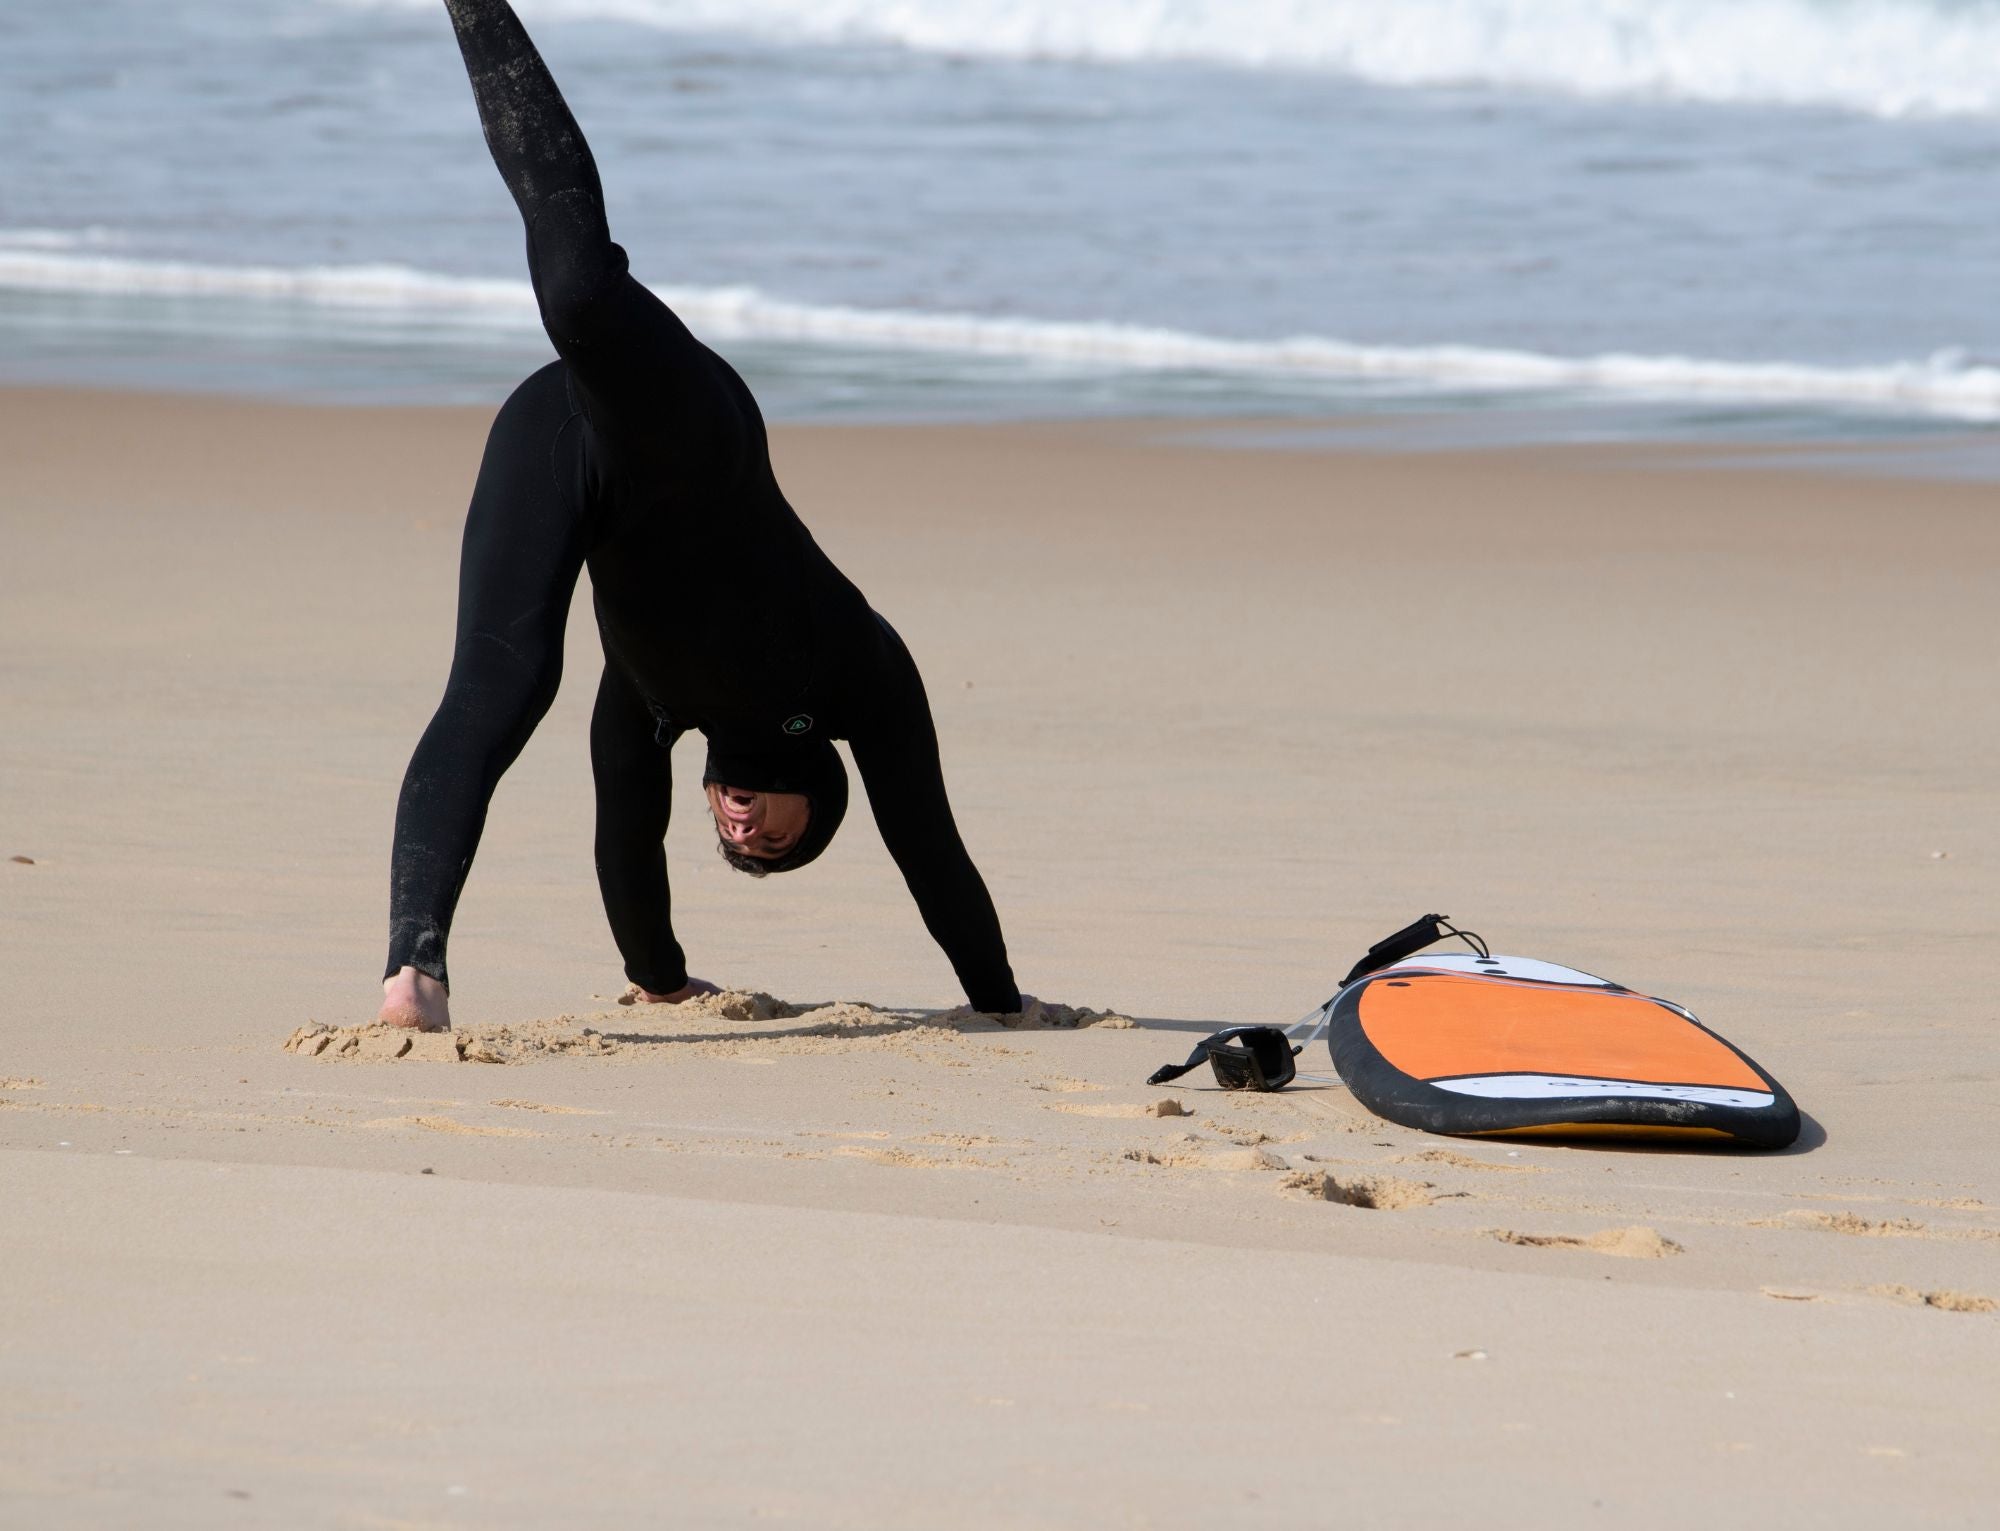 a surfer in a full wetsuit warming up on the beach